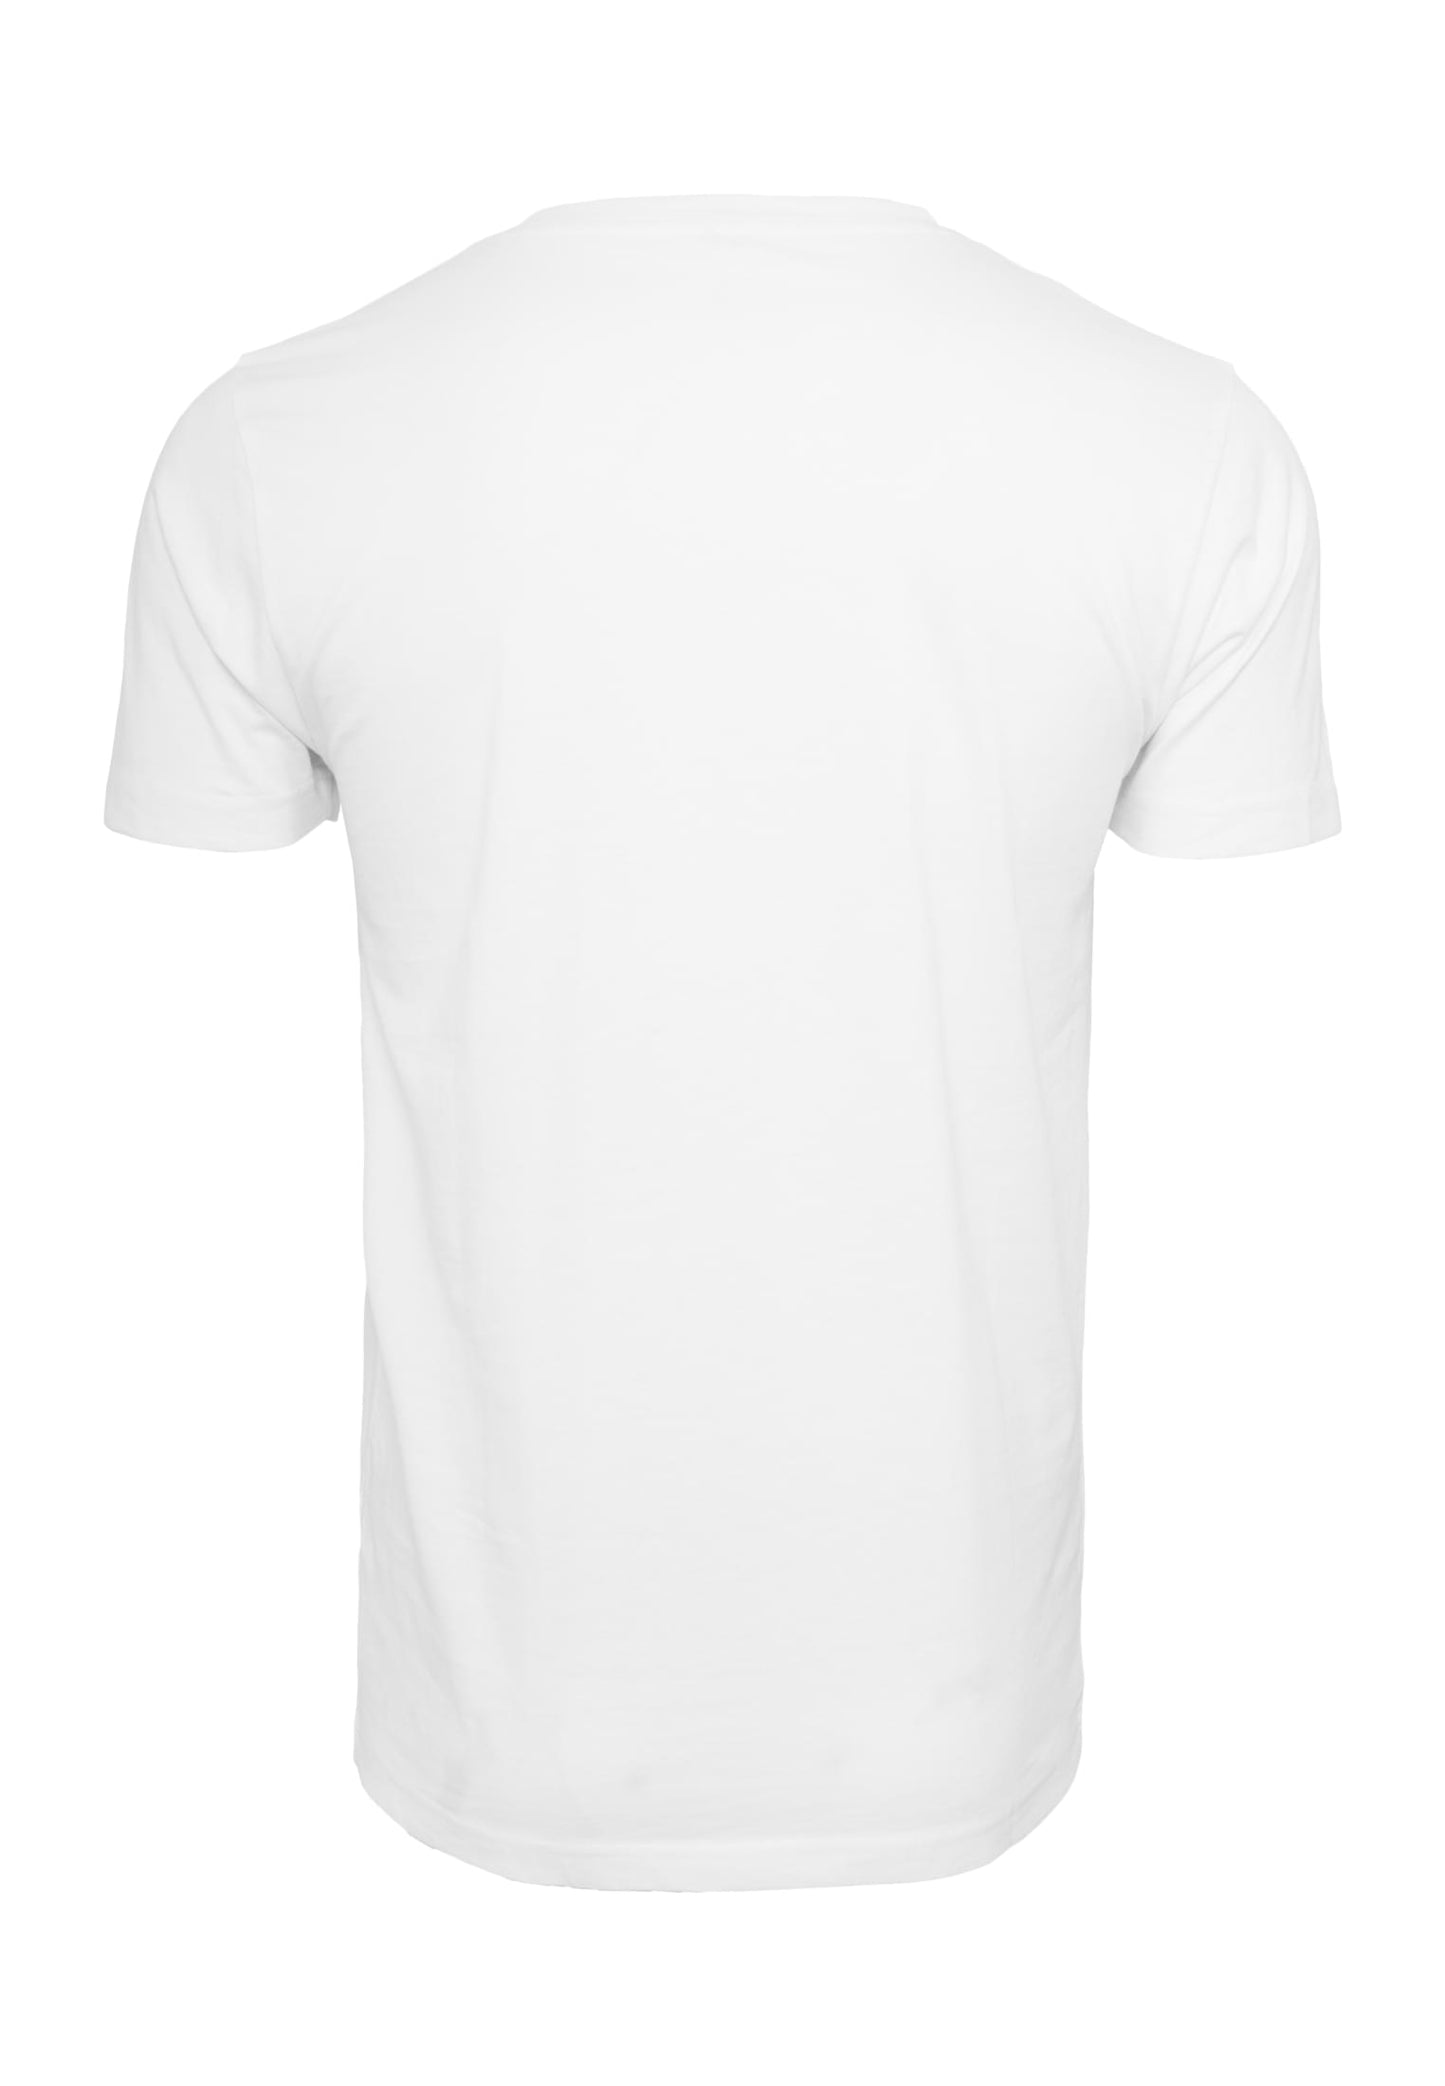 Mister Tee Employee T-Shirt white im BAWRZ® One Stop Hip-Hop Shop